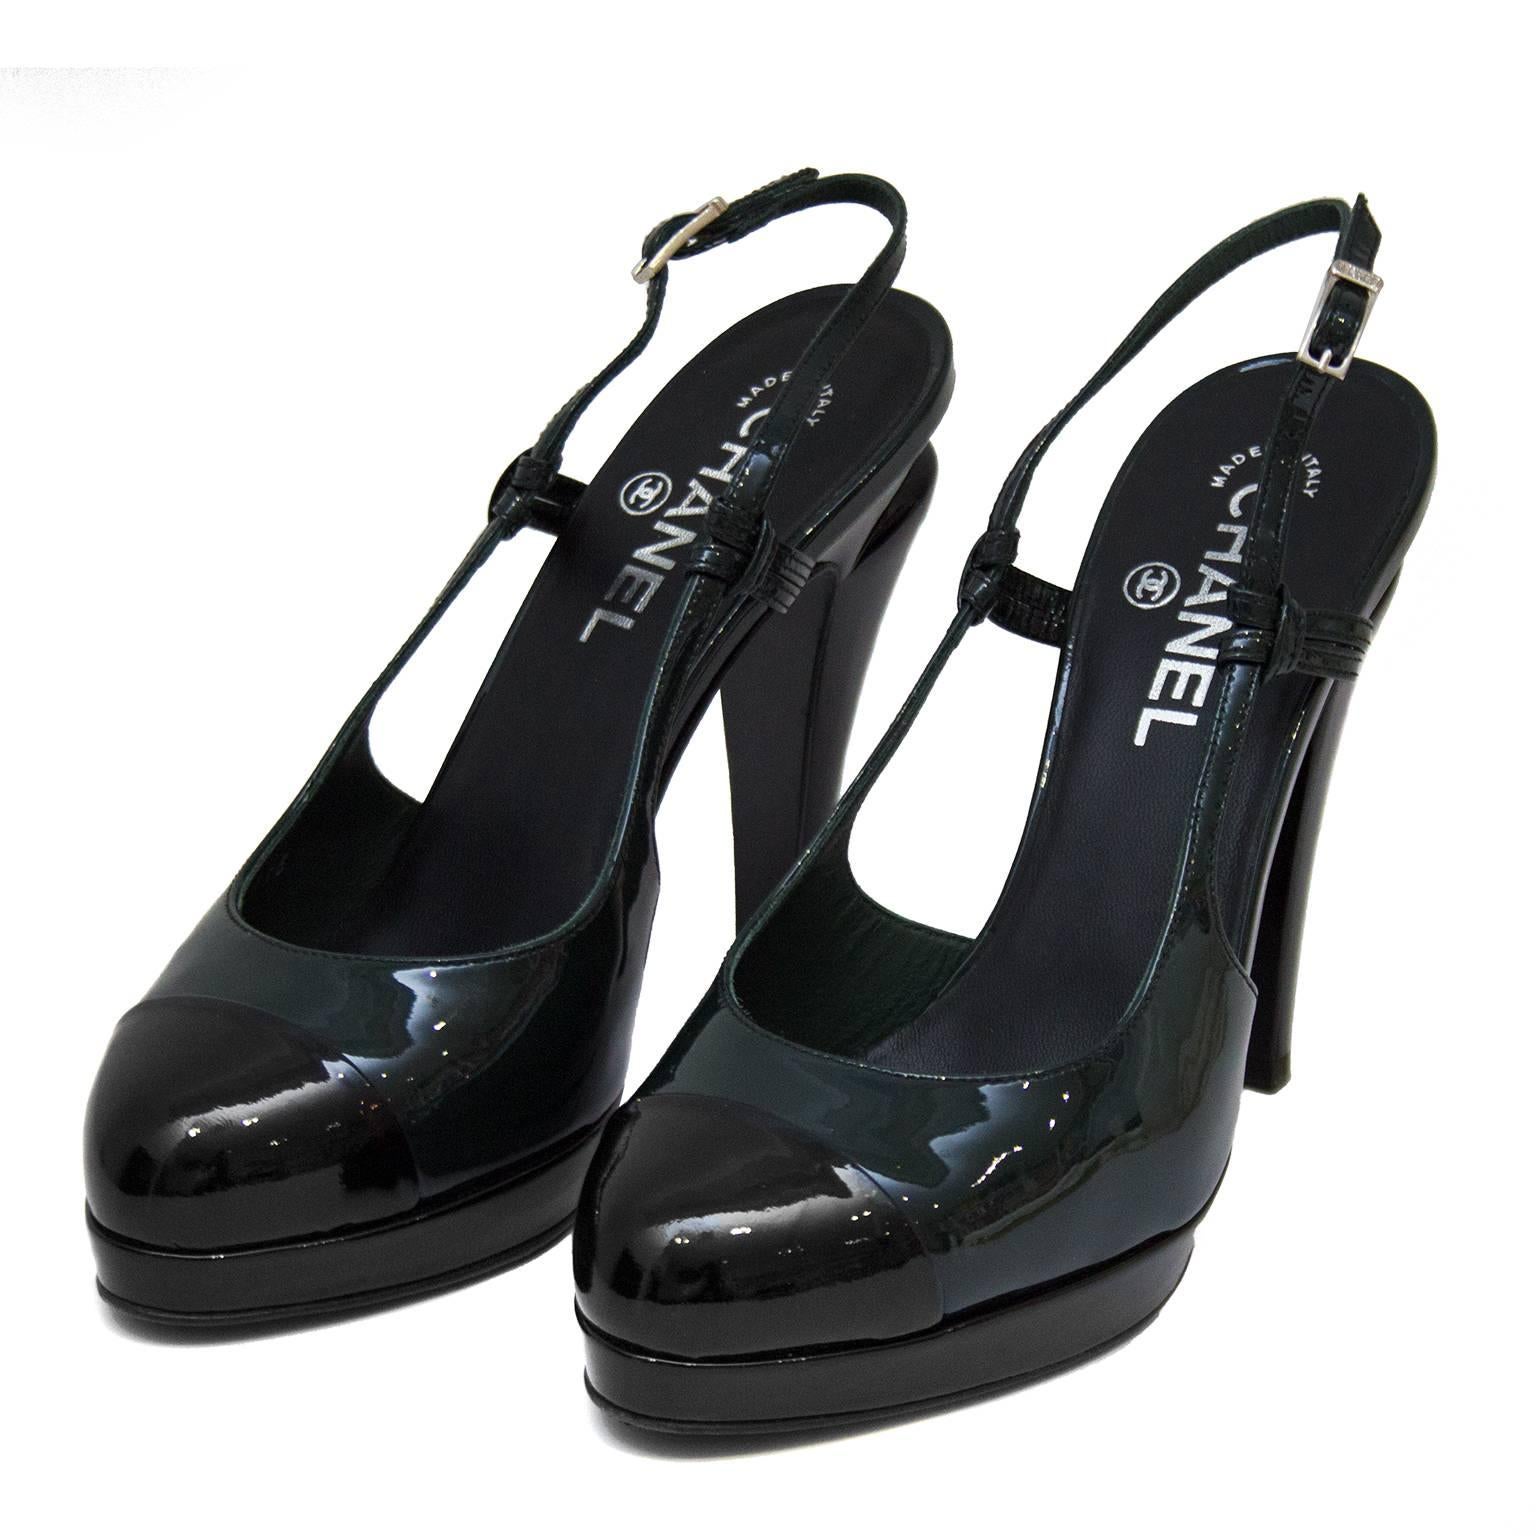 2000's Chanel patent leather high heels. Two-toned dark green with black cap toe, platform and heel. Sling back with silver buckle. 5" heel with small cut out. Black leather insole with silver brand stamping. Very light wear to soles. Size FR